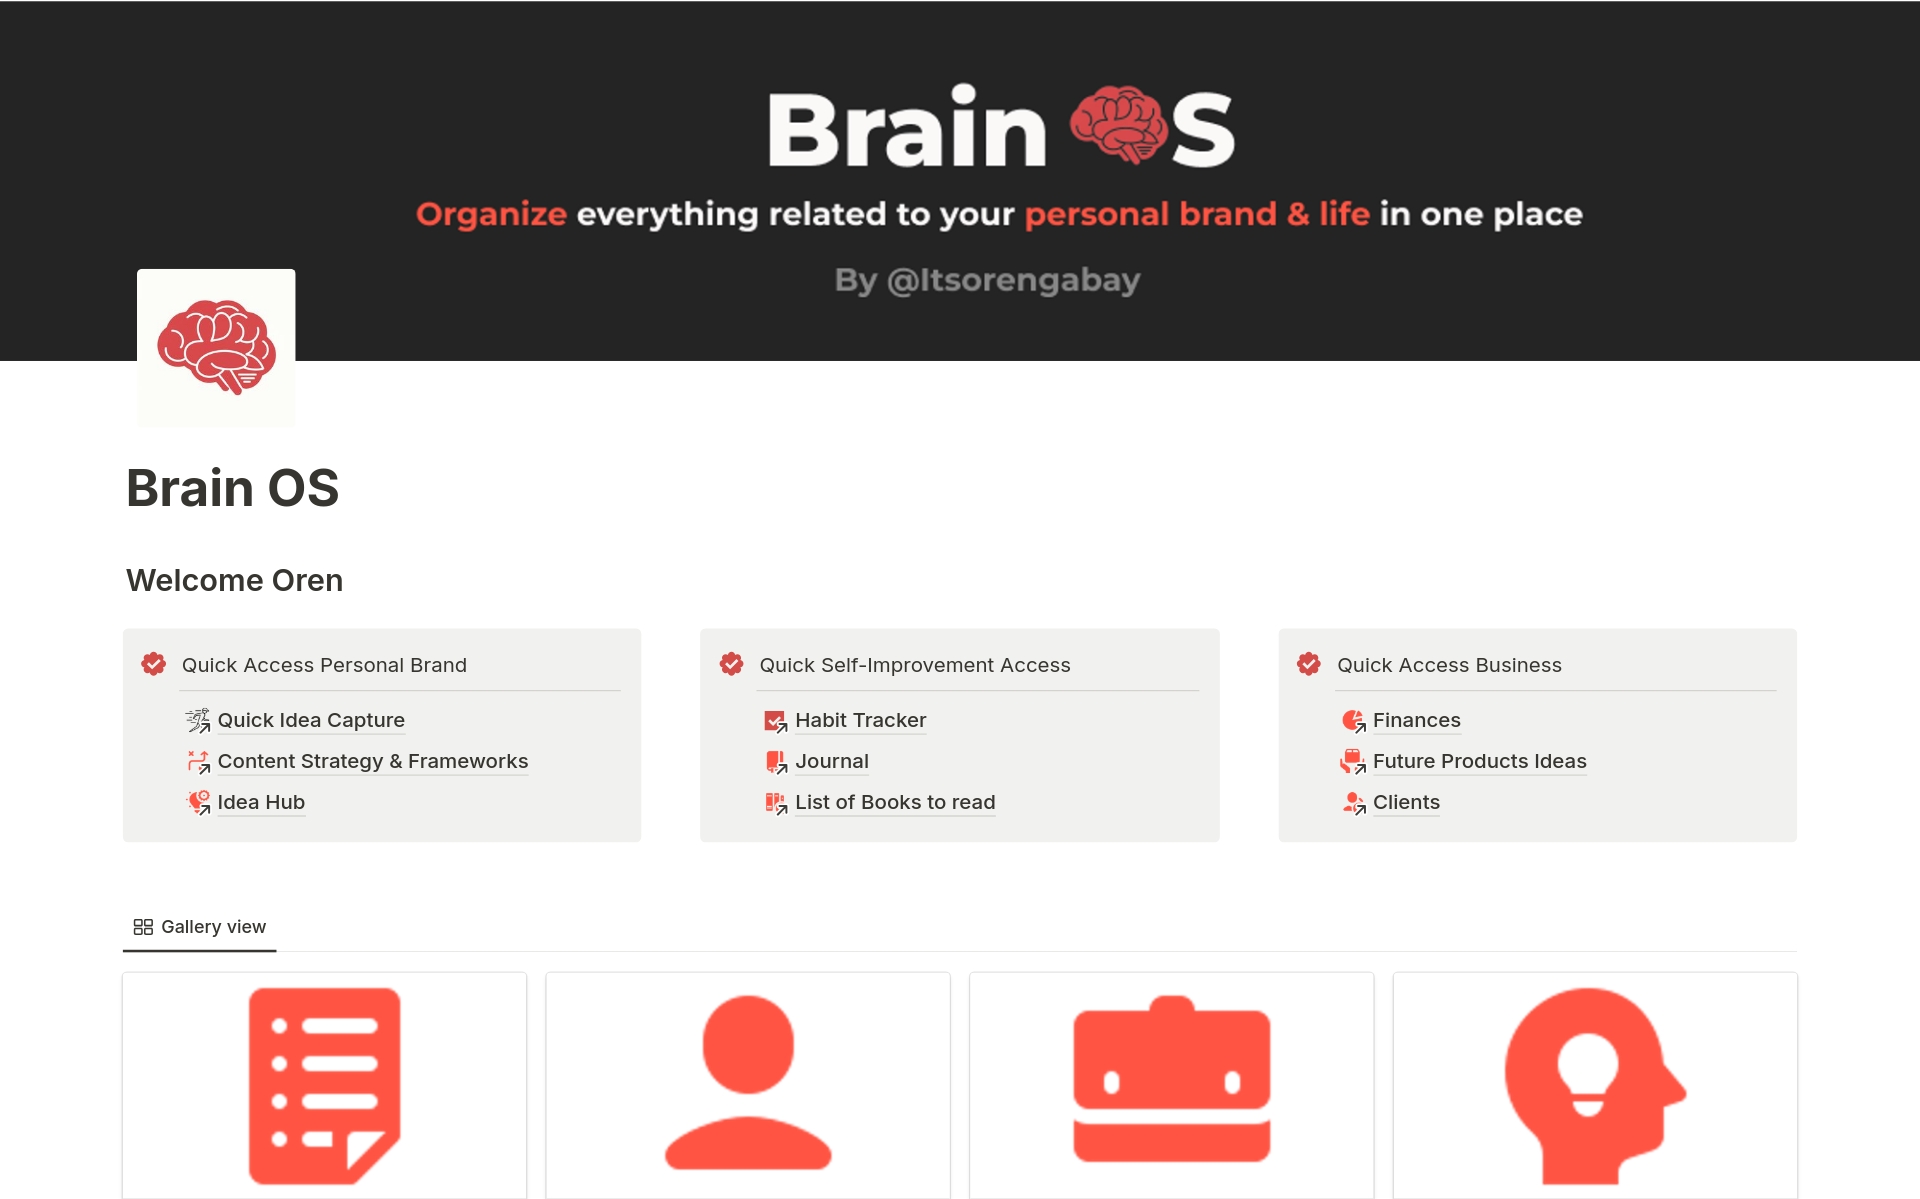 Organize everything related to your personal brand, life, and business in one place!
Organization has never been easier and user friendly to navigate through the pages.